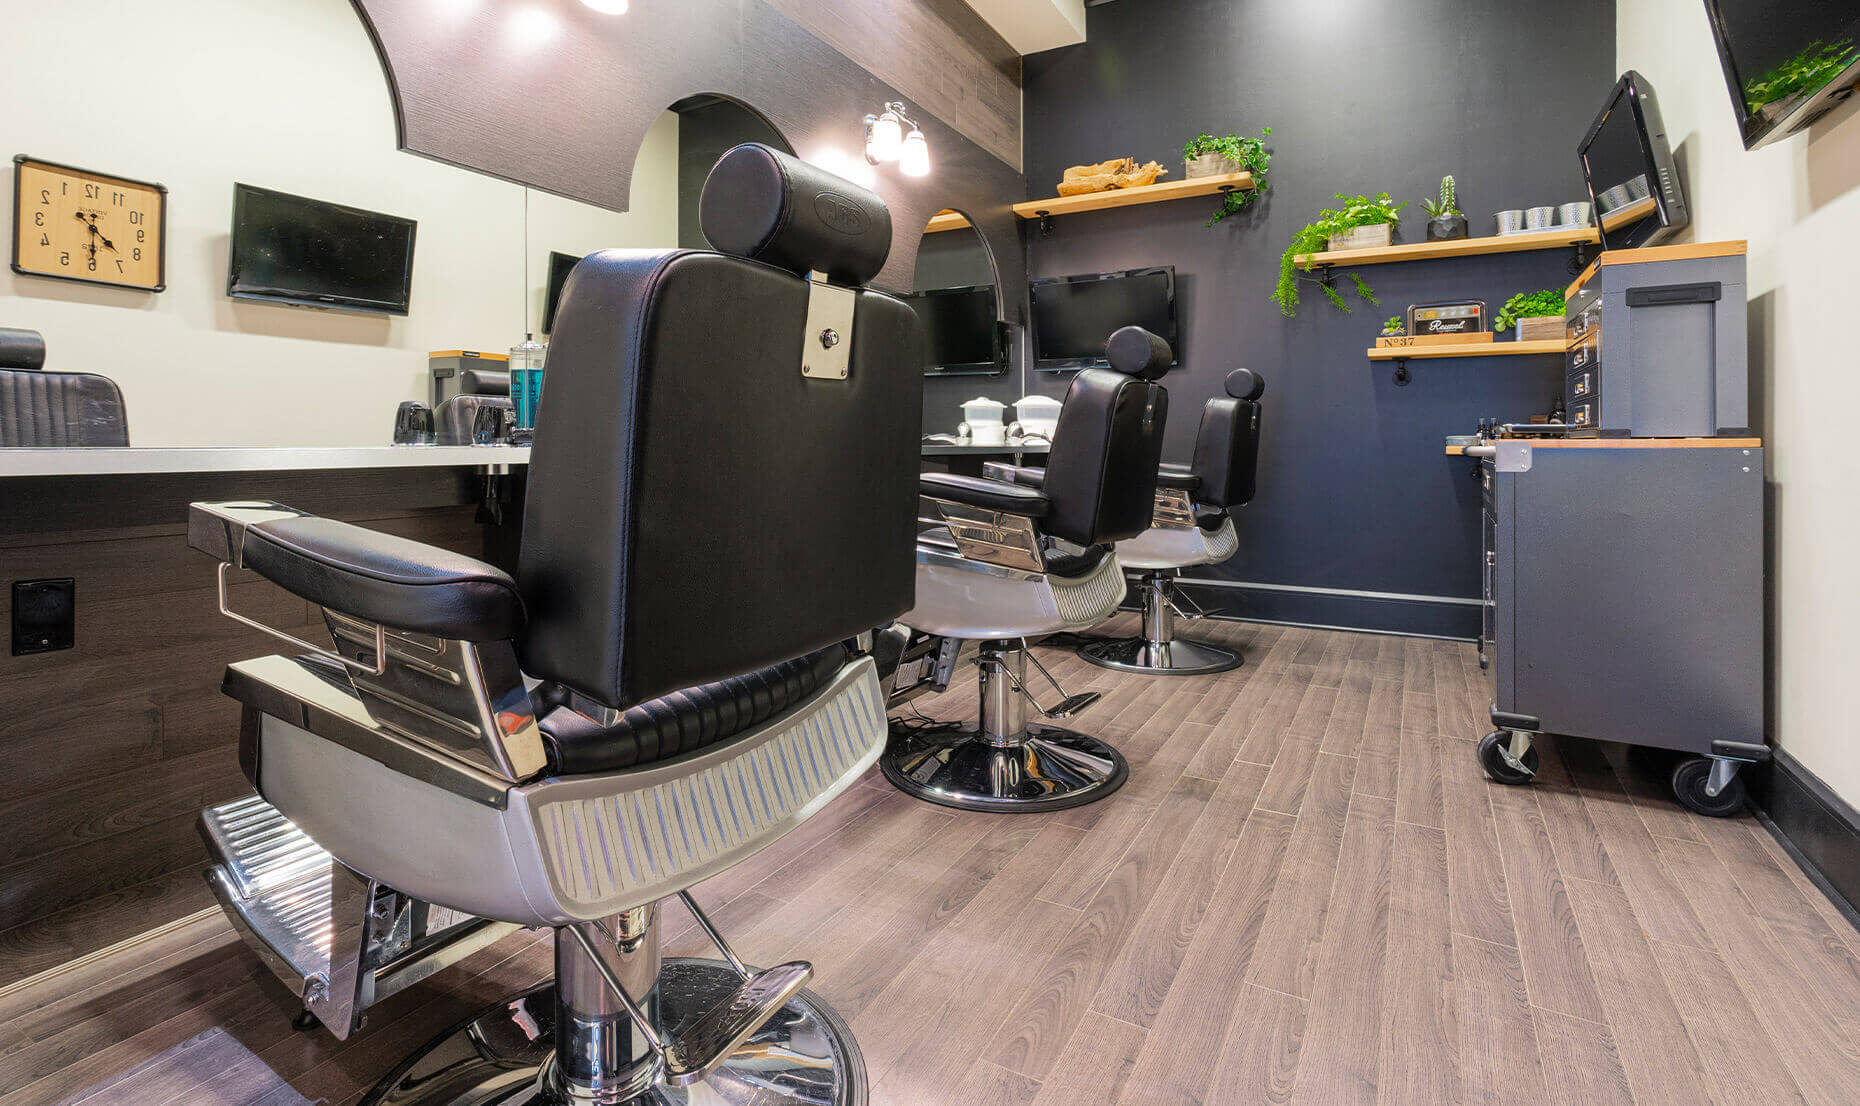 Hair salon for him | Men's grooming lounge | Haircut & shave